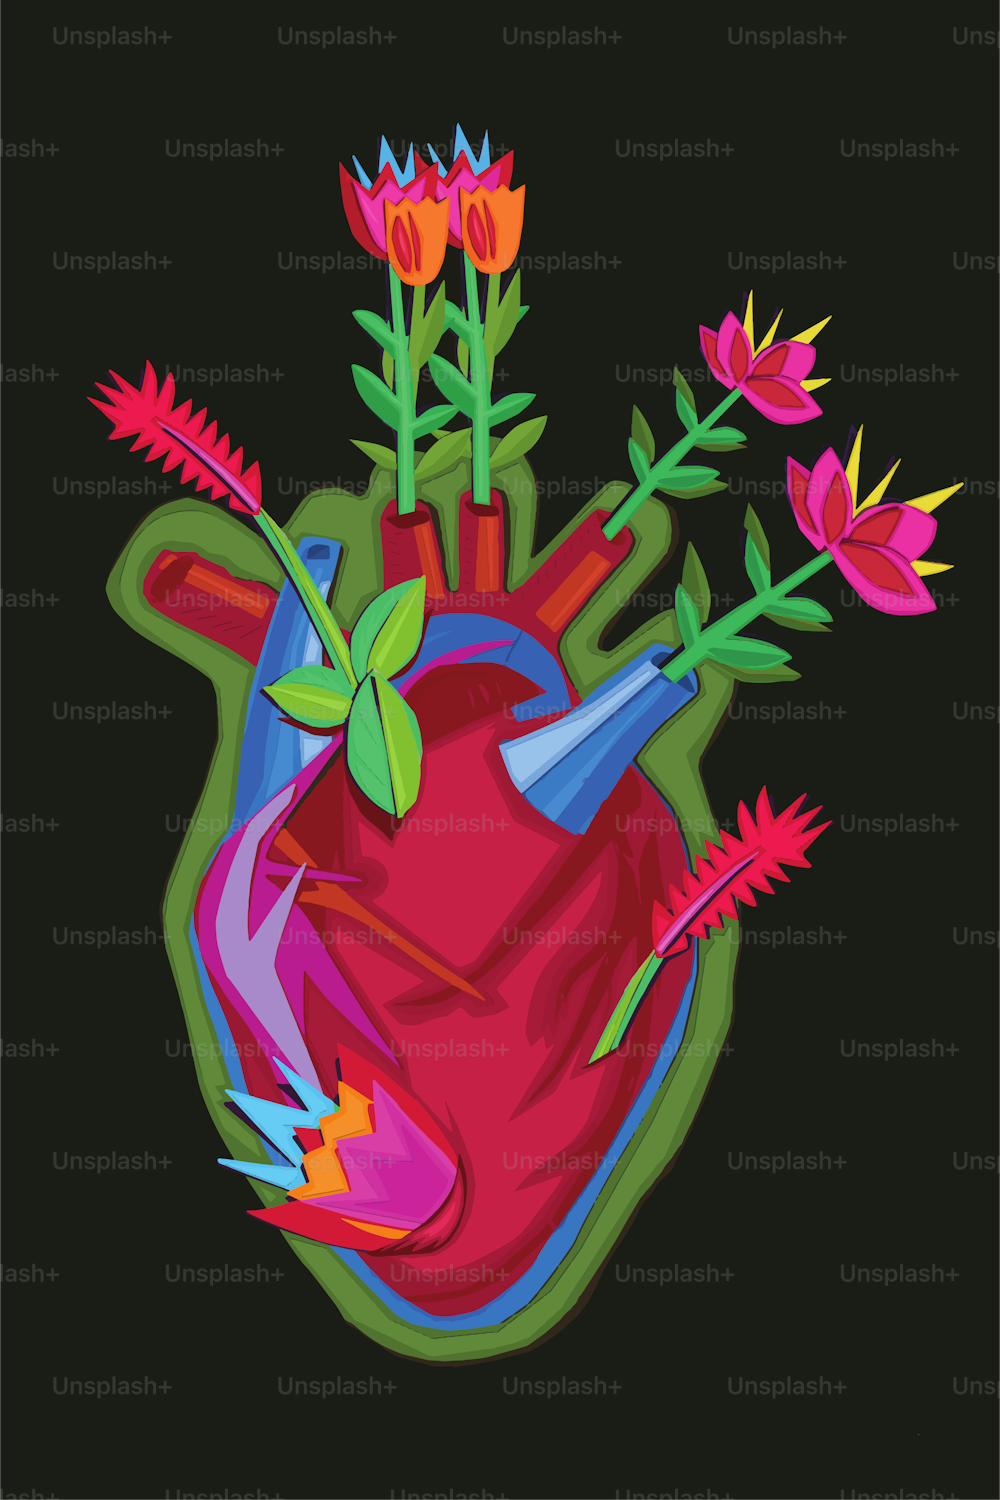 Human heart and flowers in paper art style